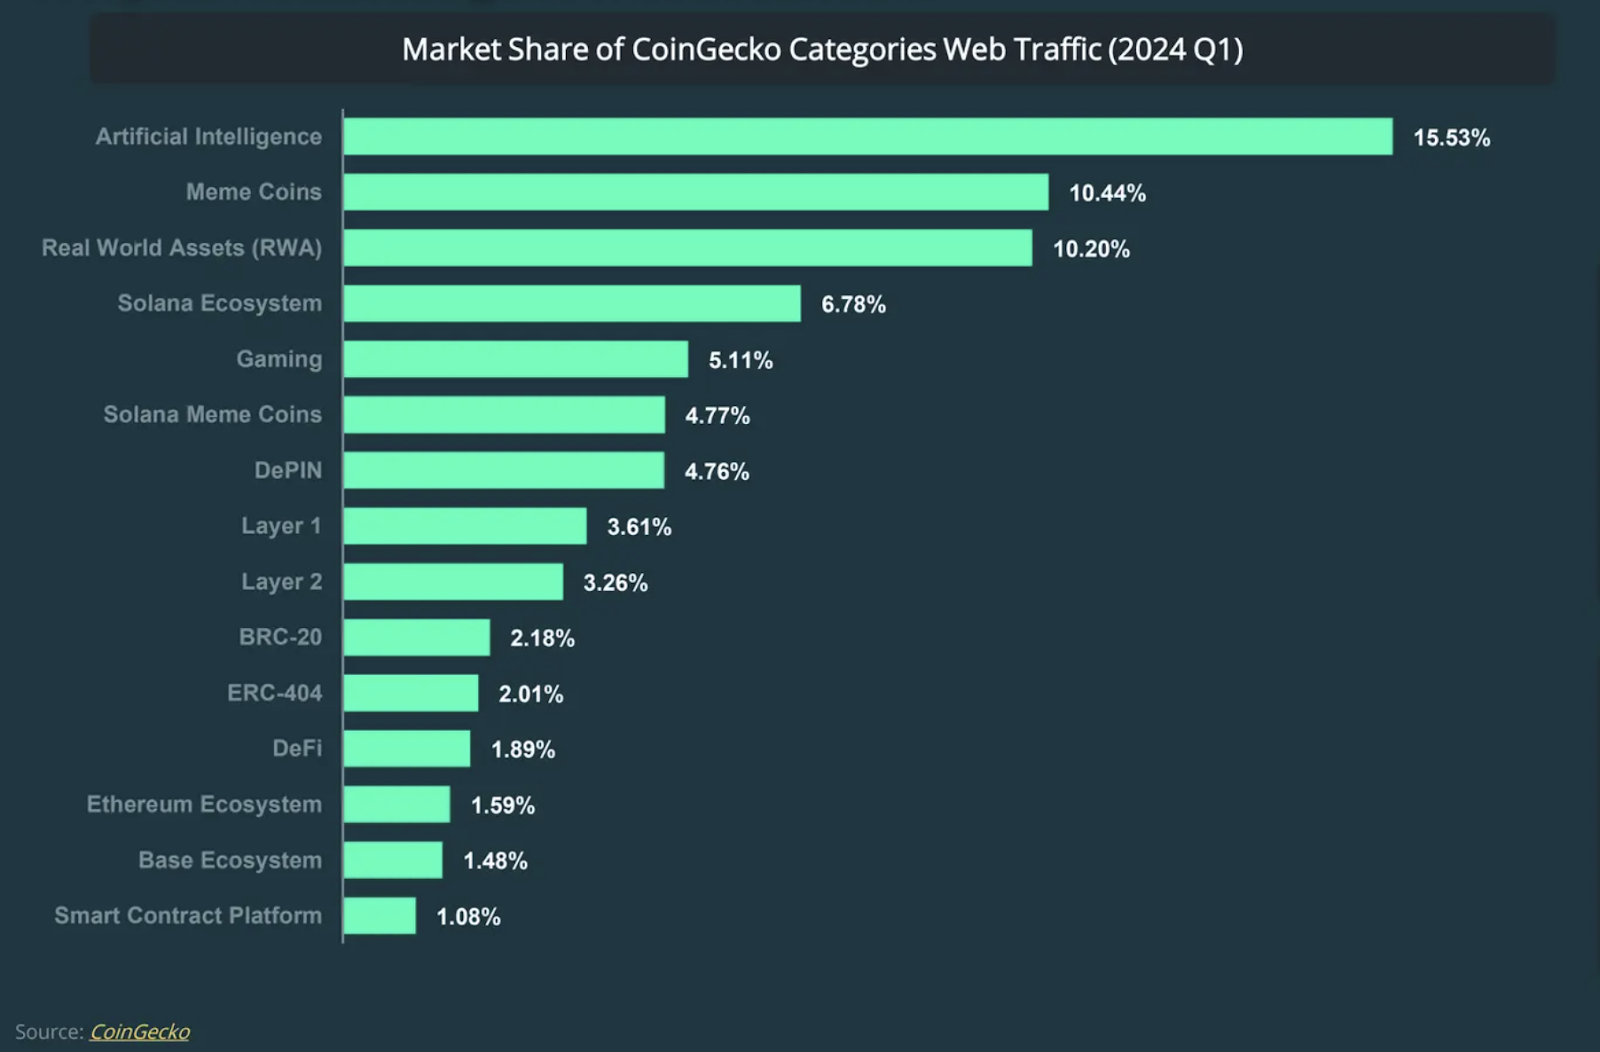 coingecko market share of web traffic categories